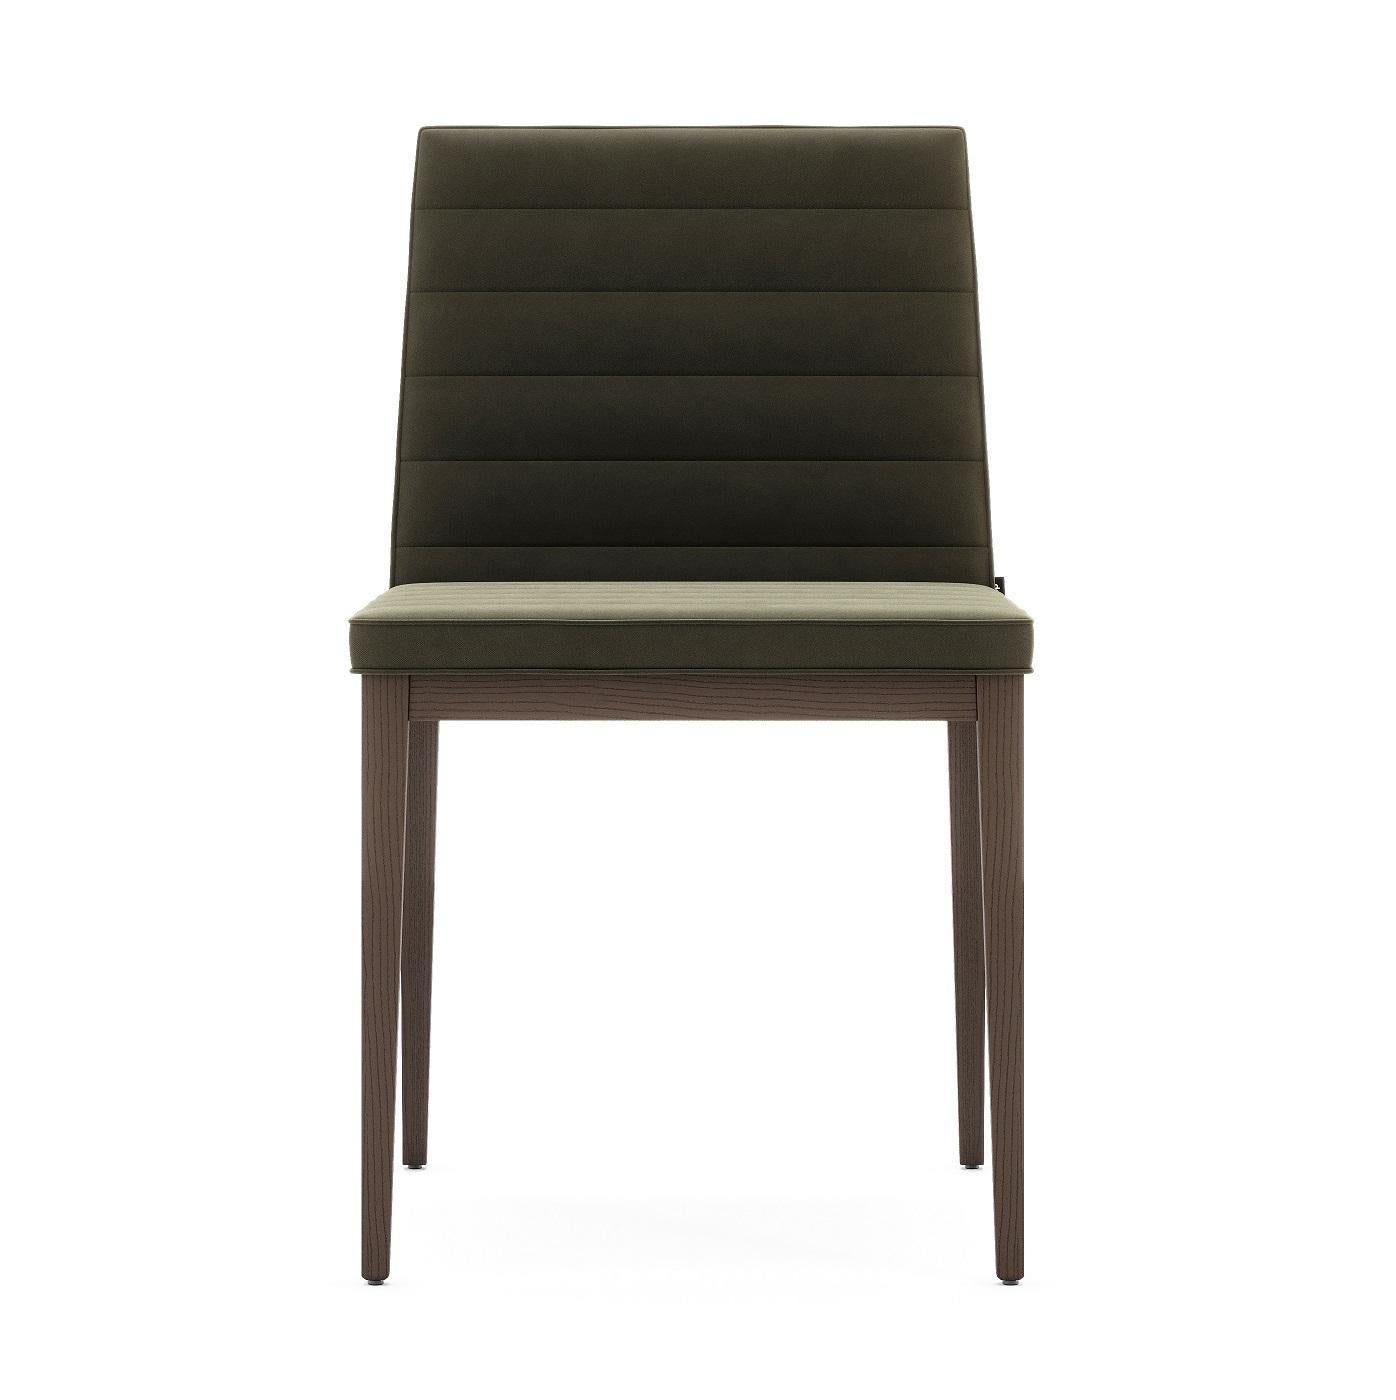 This dining chair combines beauty with functionality with its fumed wood legs.
Horizontal stitching structured back.
Upholstered in beige cotton velvet.
Suitable for contract use.
100% European made product.
Contact us to enquire about COM/COL